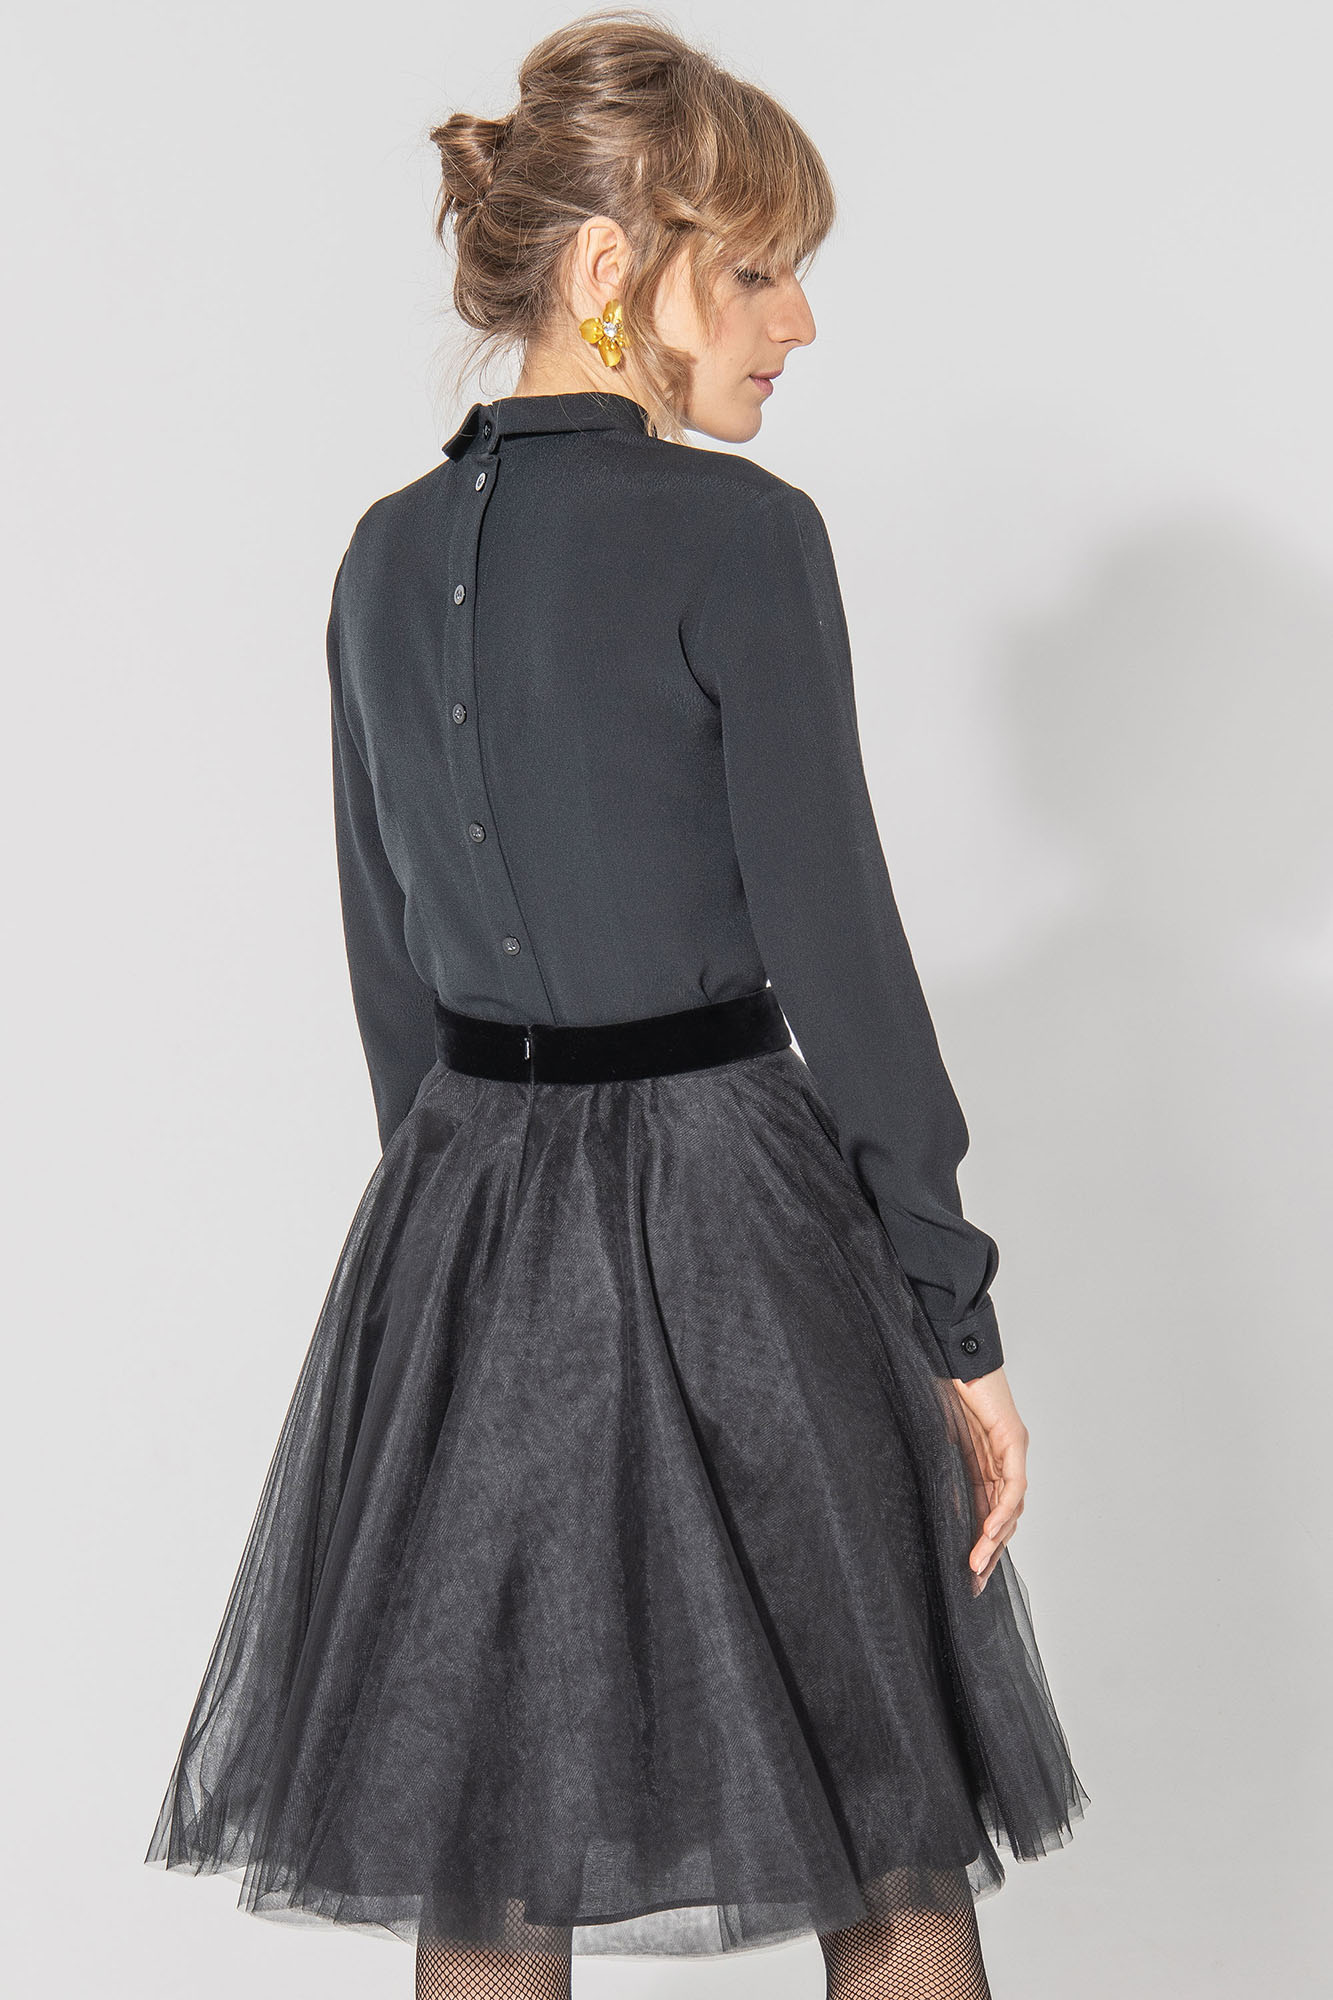 tulle skirt with a bow on the belt in black back • Sassa Björg